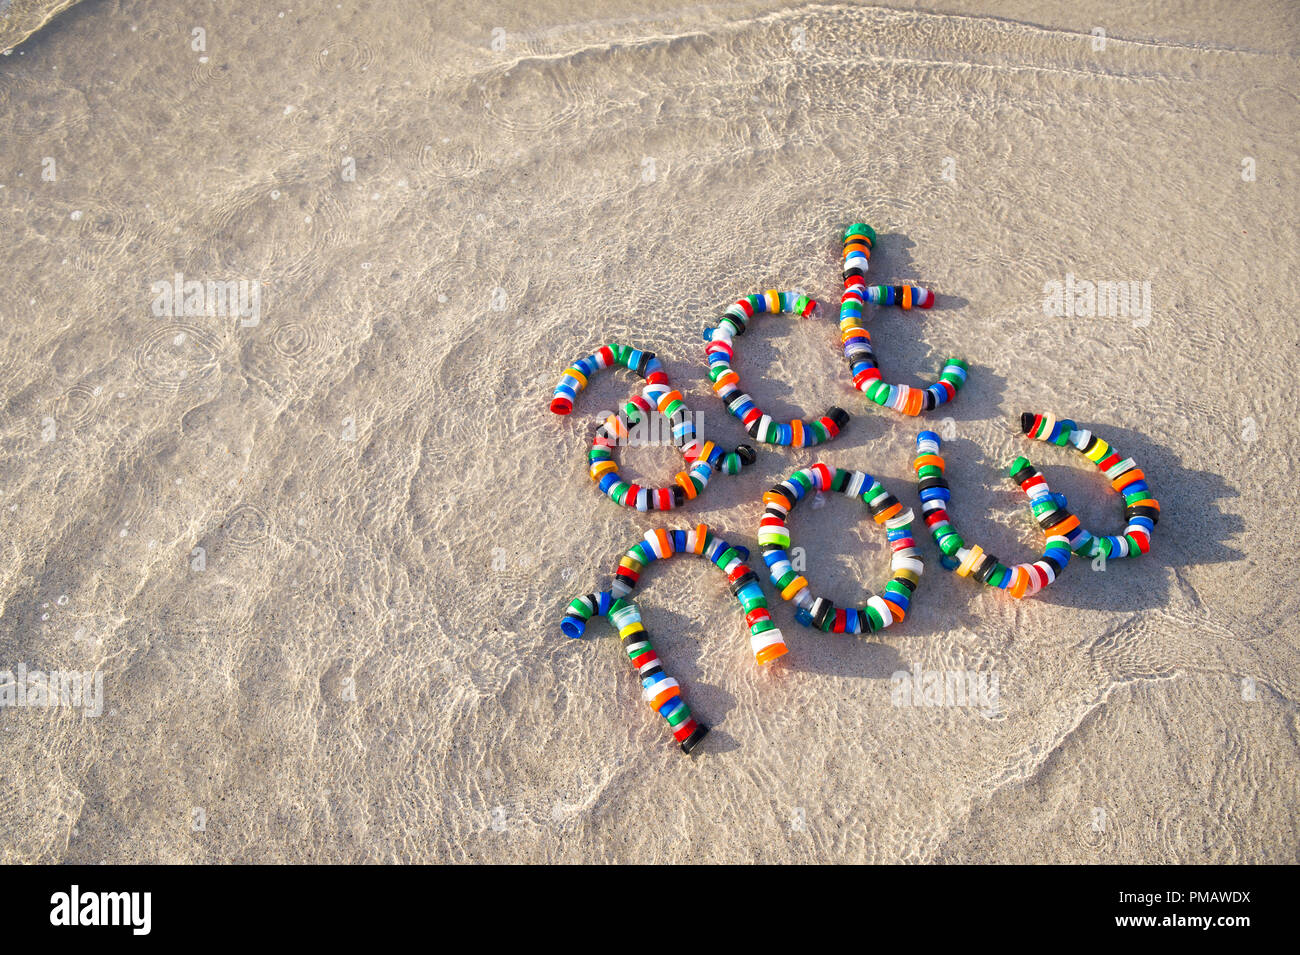 Colorful plastic bottle caps spell out 'act now' on a sandy beach as a wave laps around. A reminder for people to take action on pollution - reduce, r Stock Photo